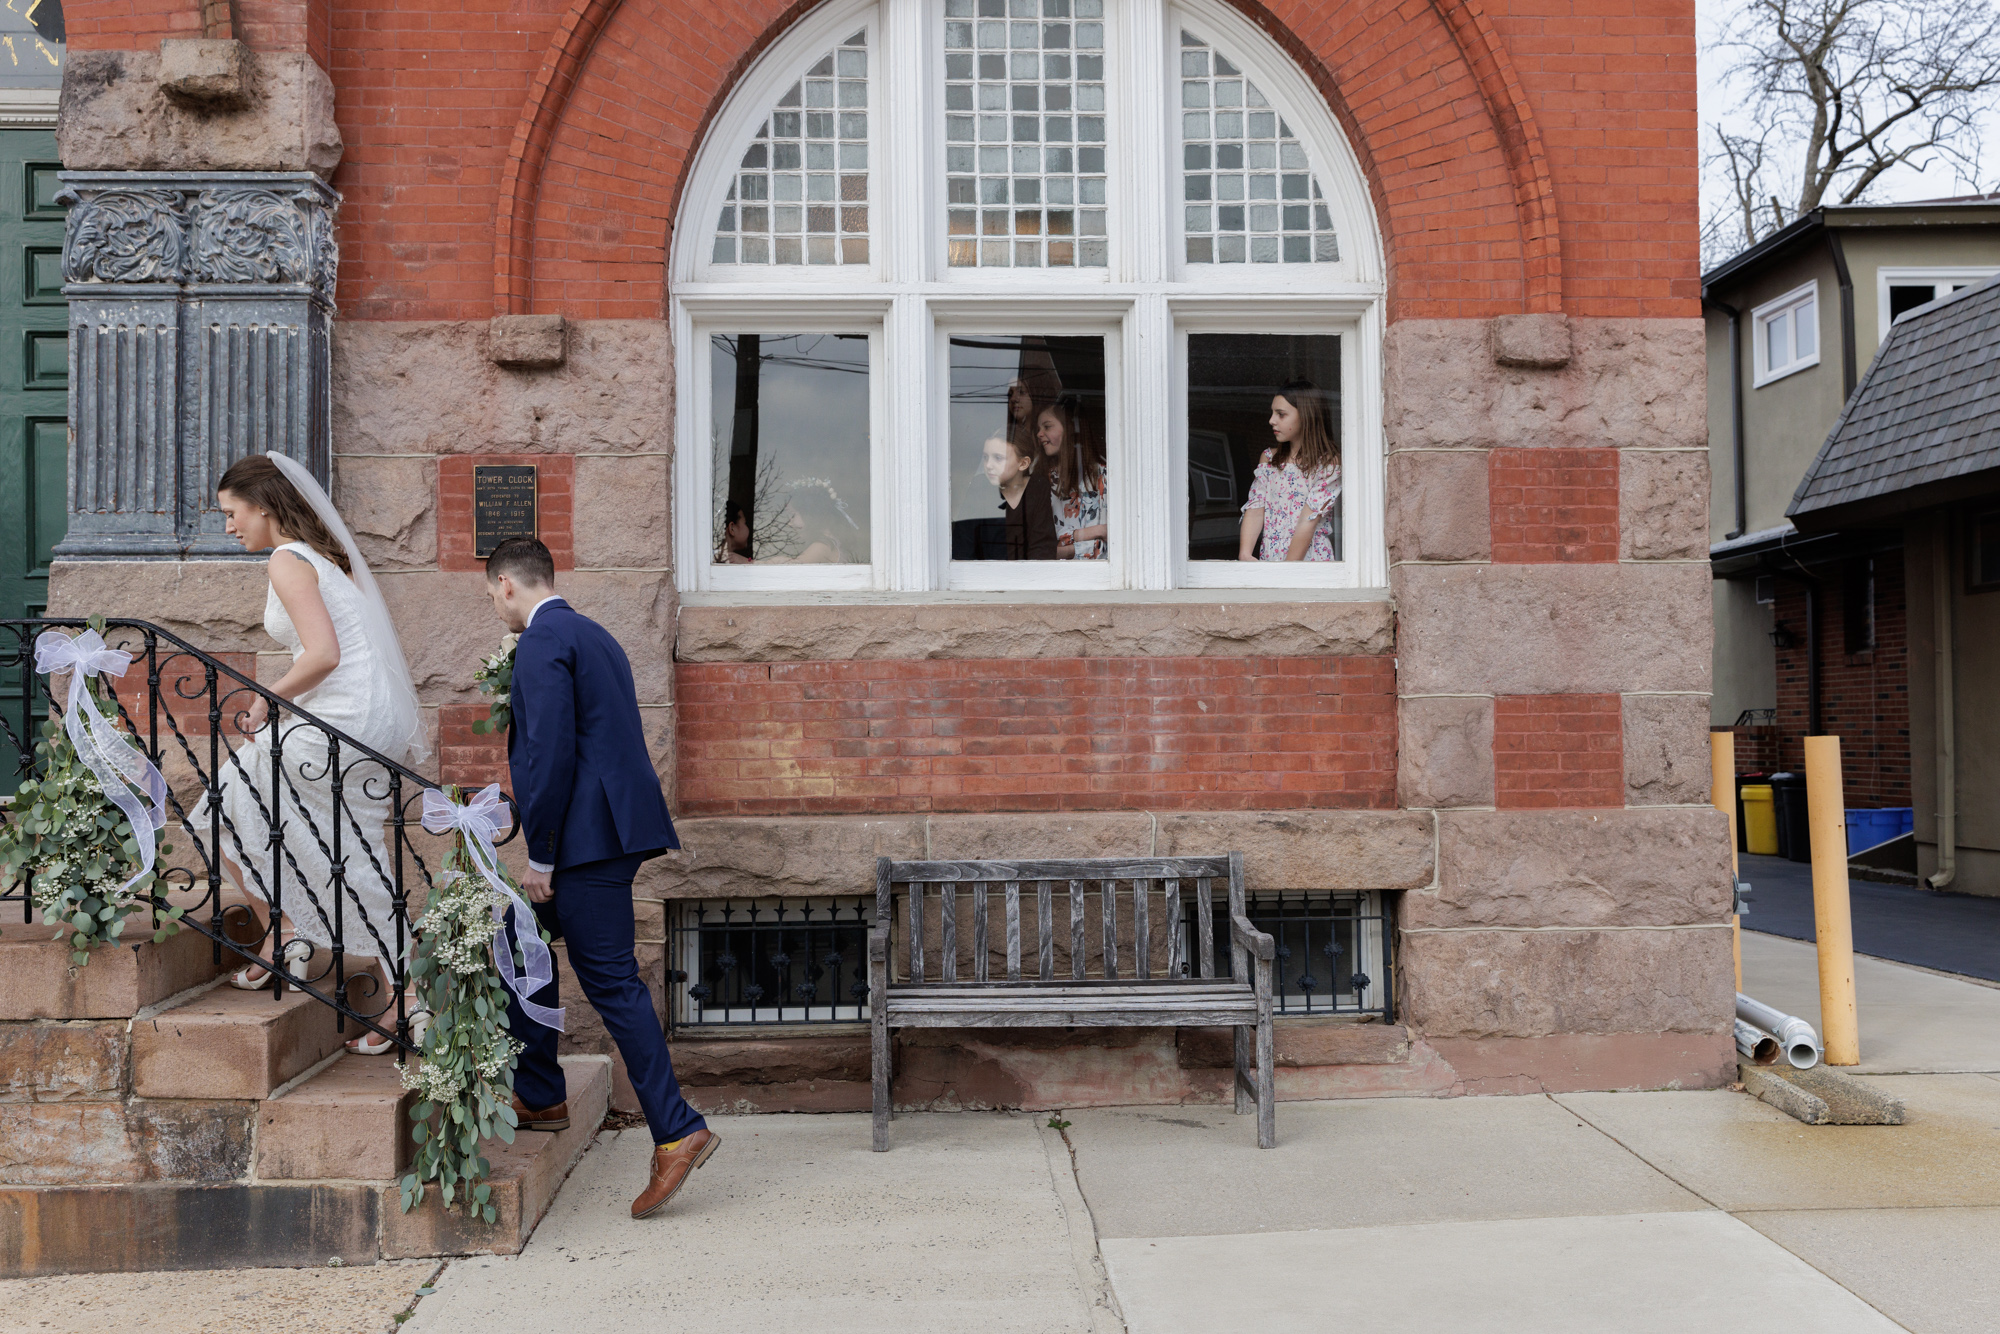 Adorable children at a wedding look out a window as the bride and groom walk by in front of Old City Hall in Bordentown, NJ 